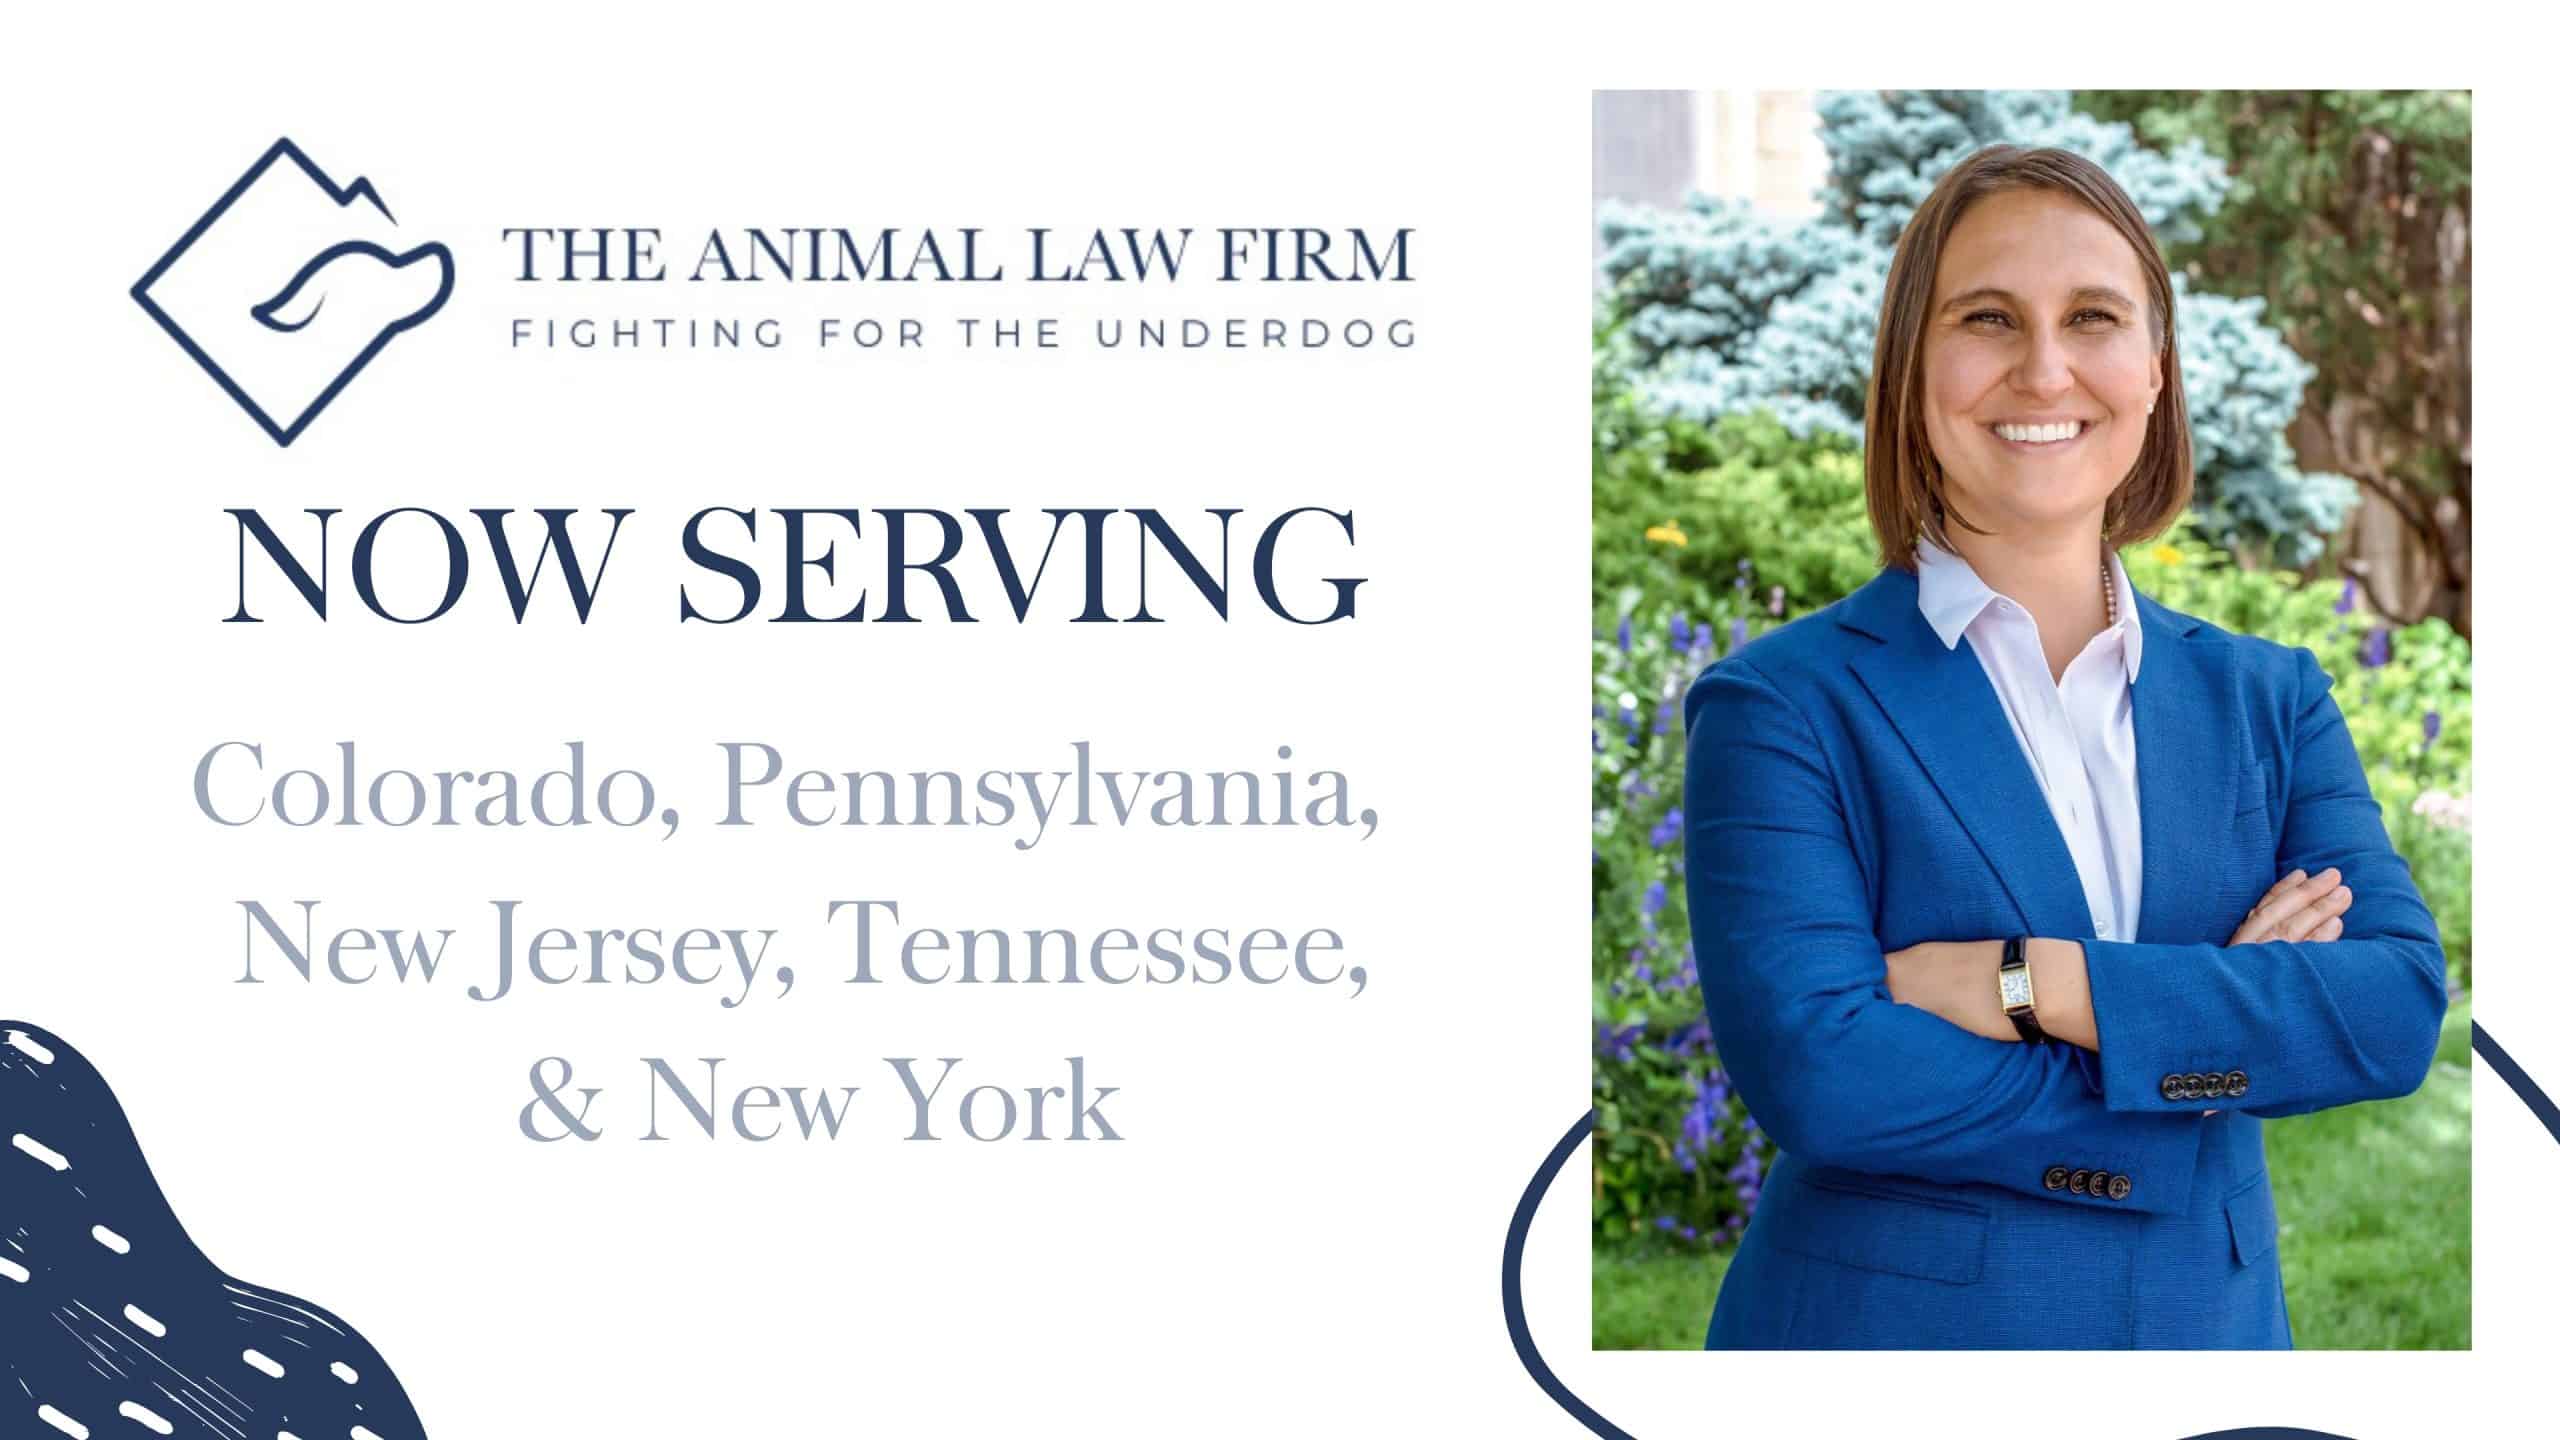 The Animal Law Firm is now accepting clients in New York & Tennessee!